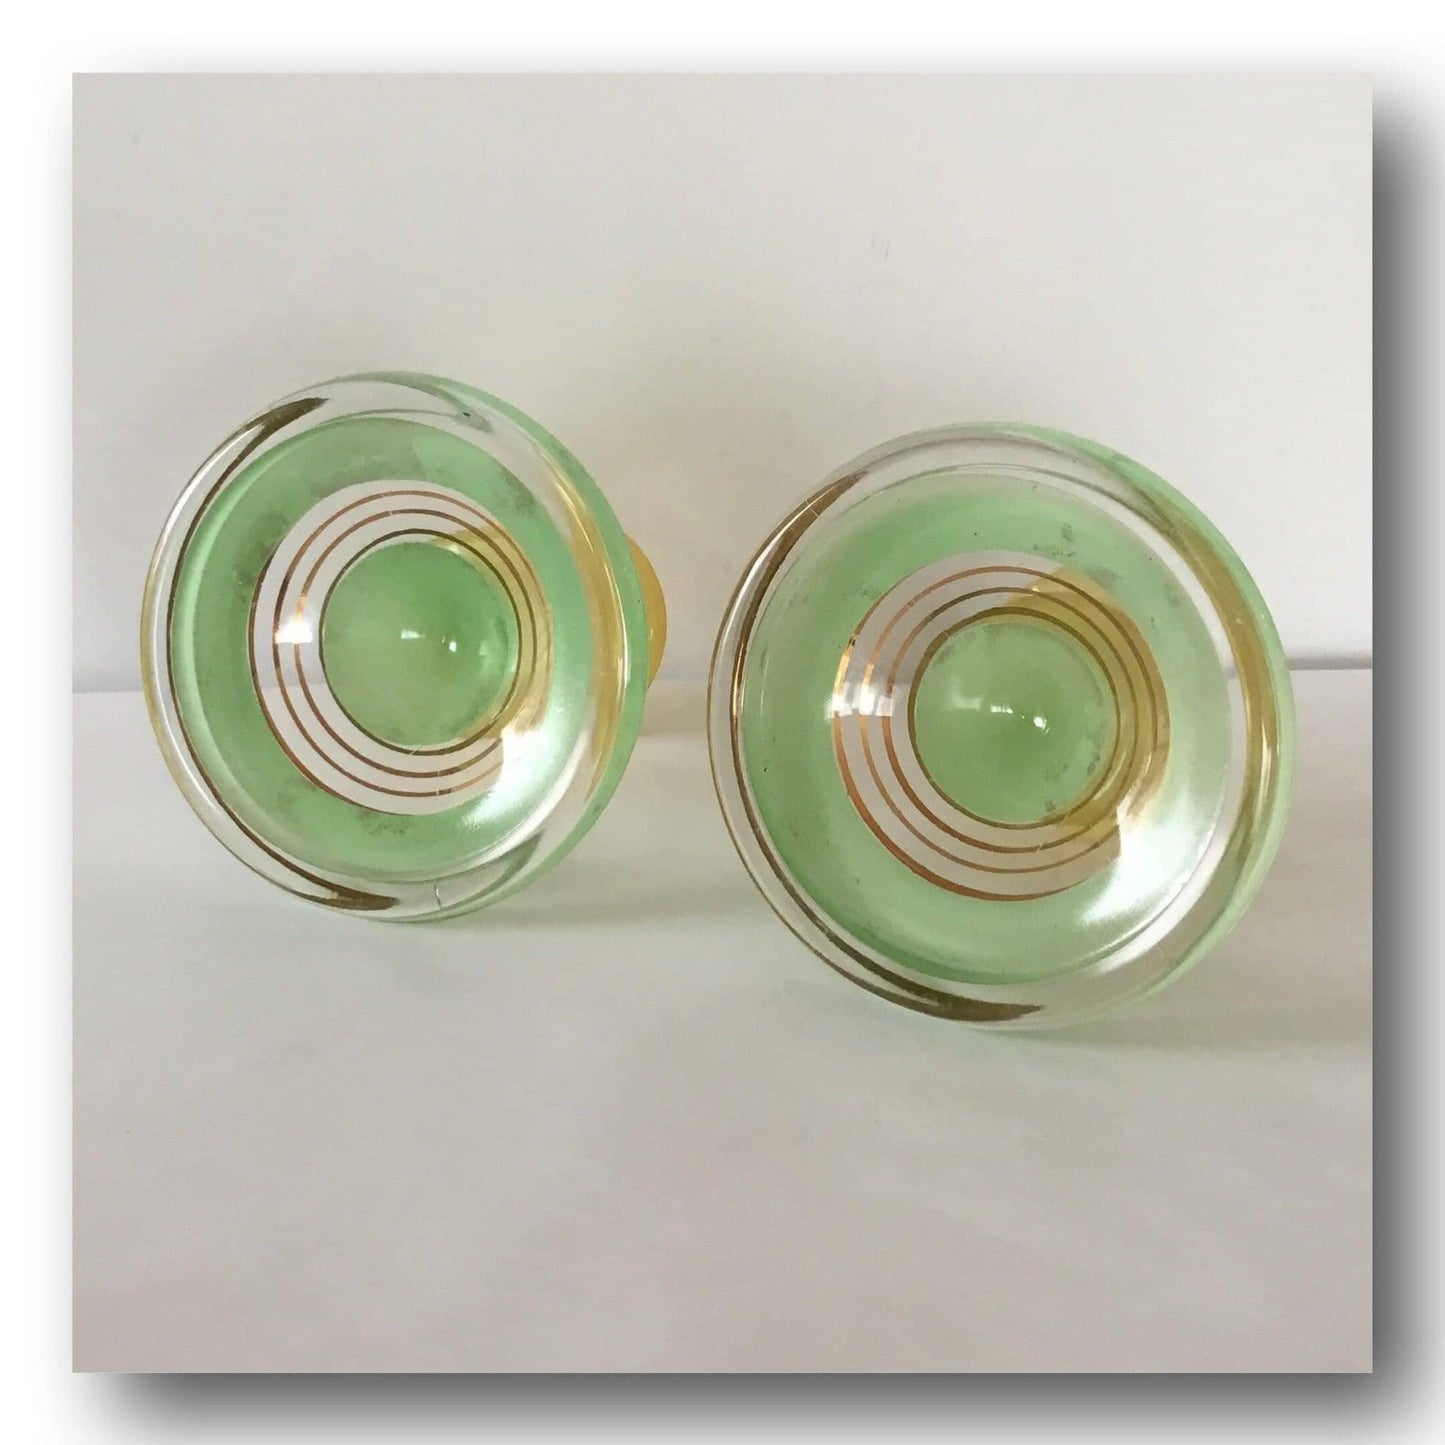 Vintage glass candlesticks holders green yellow gold bands